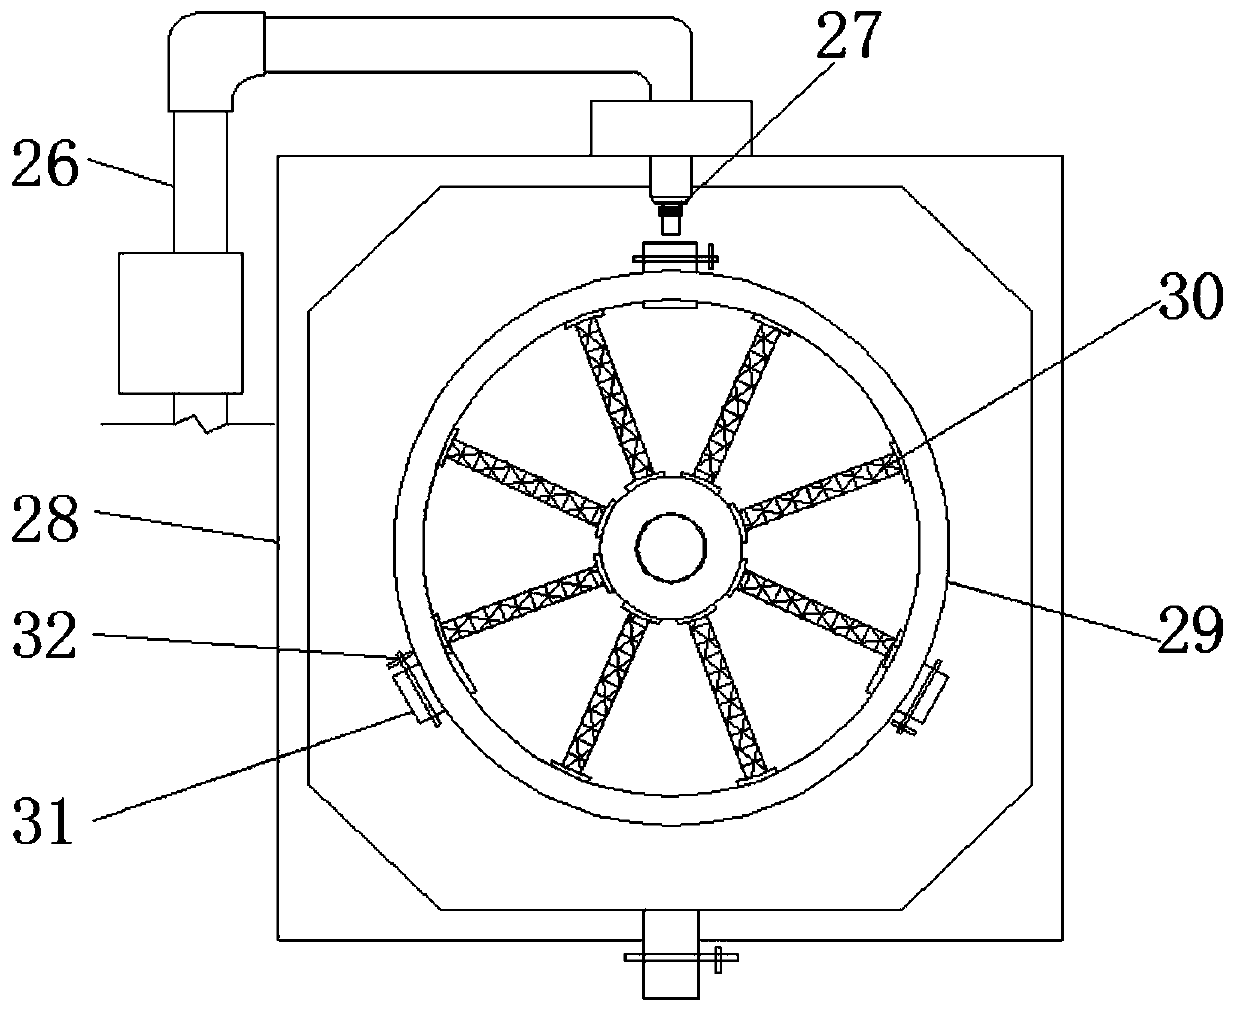 Chemical sewage filtering device with self-cleaning function